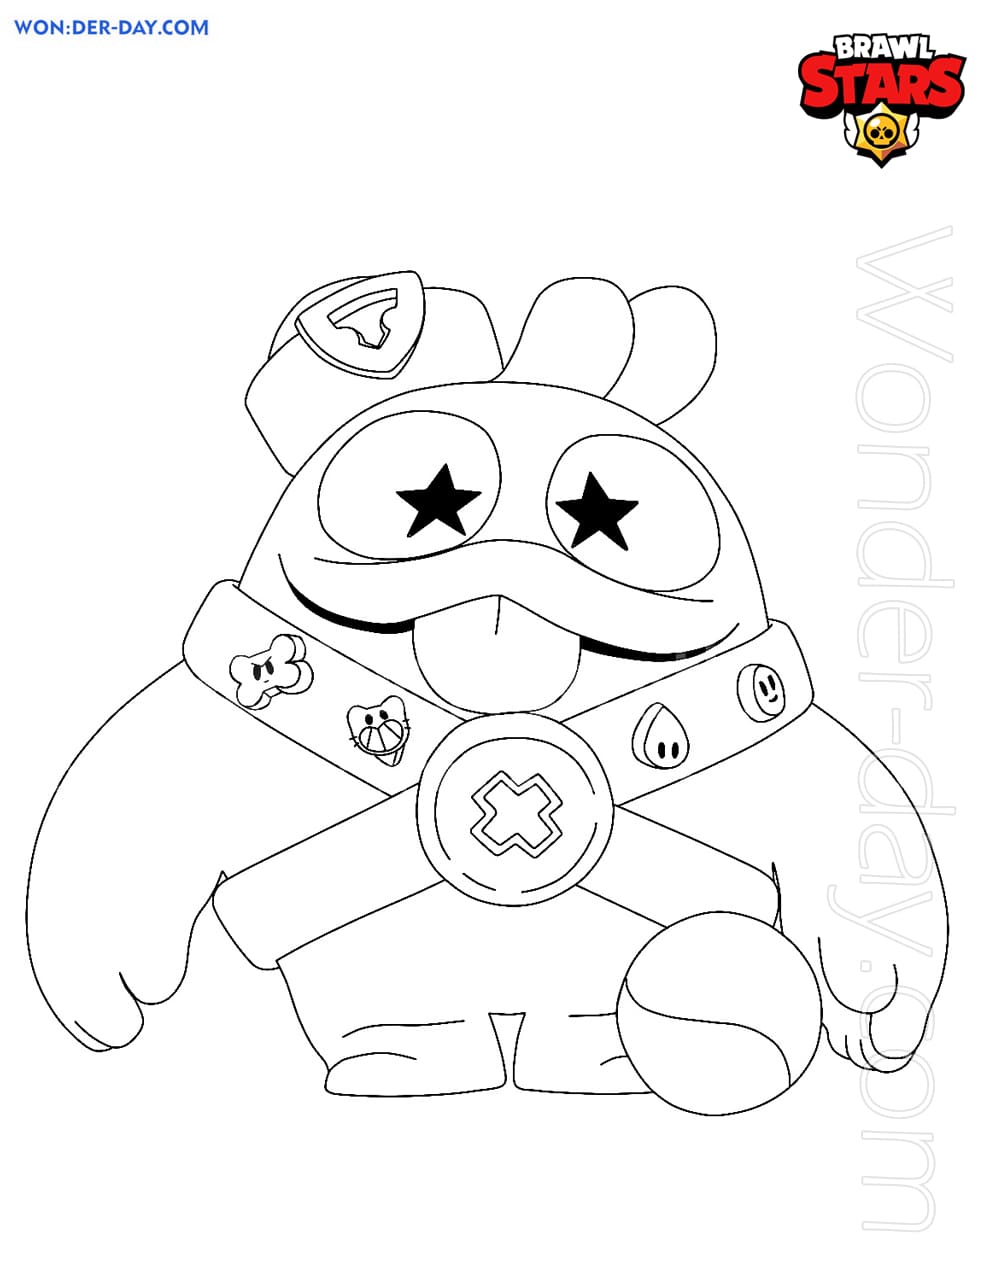 Squeak Brawl Stars Coloring Pages Wonder Day Coloring Pages For Children And Adults - disegni da colorare di brawl stars squeak